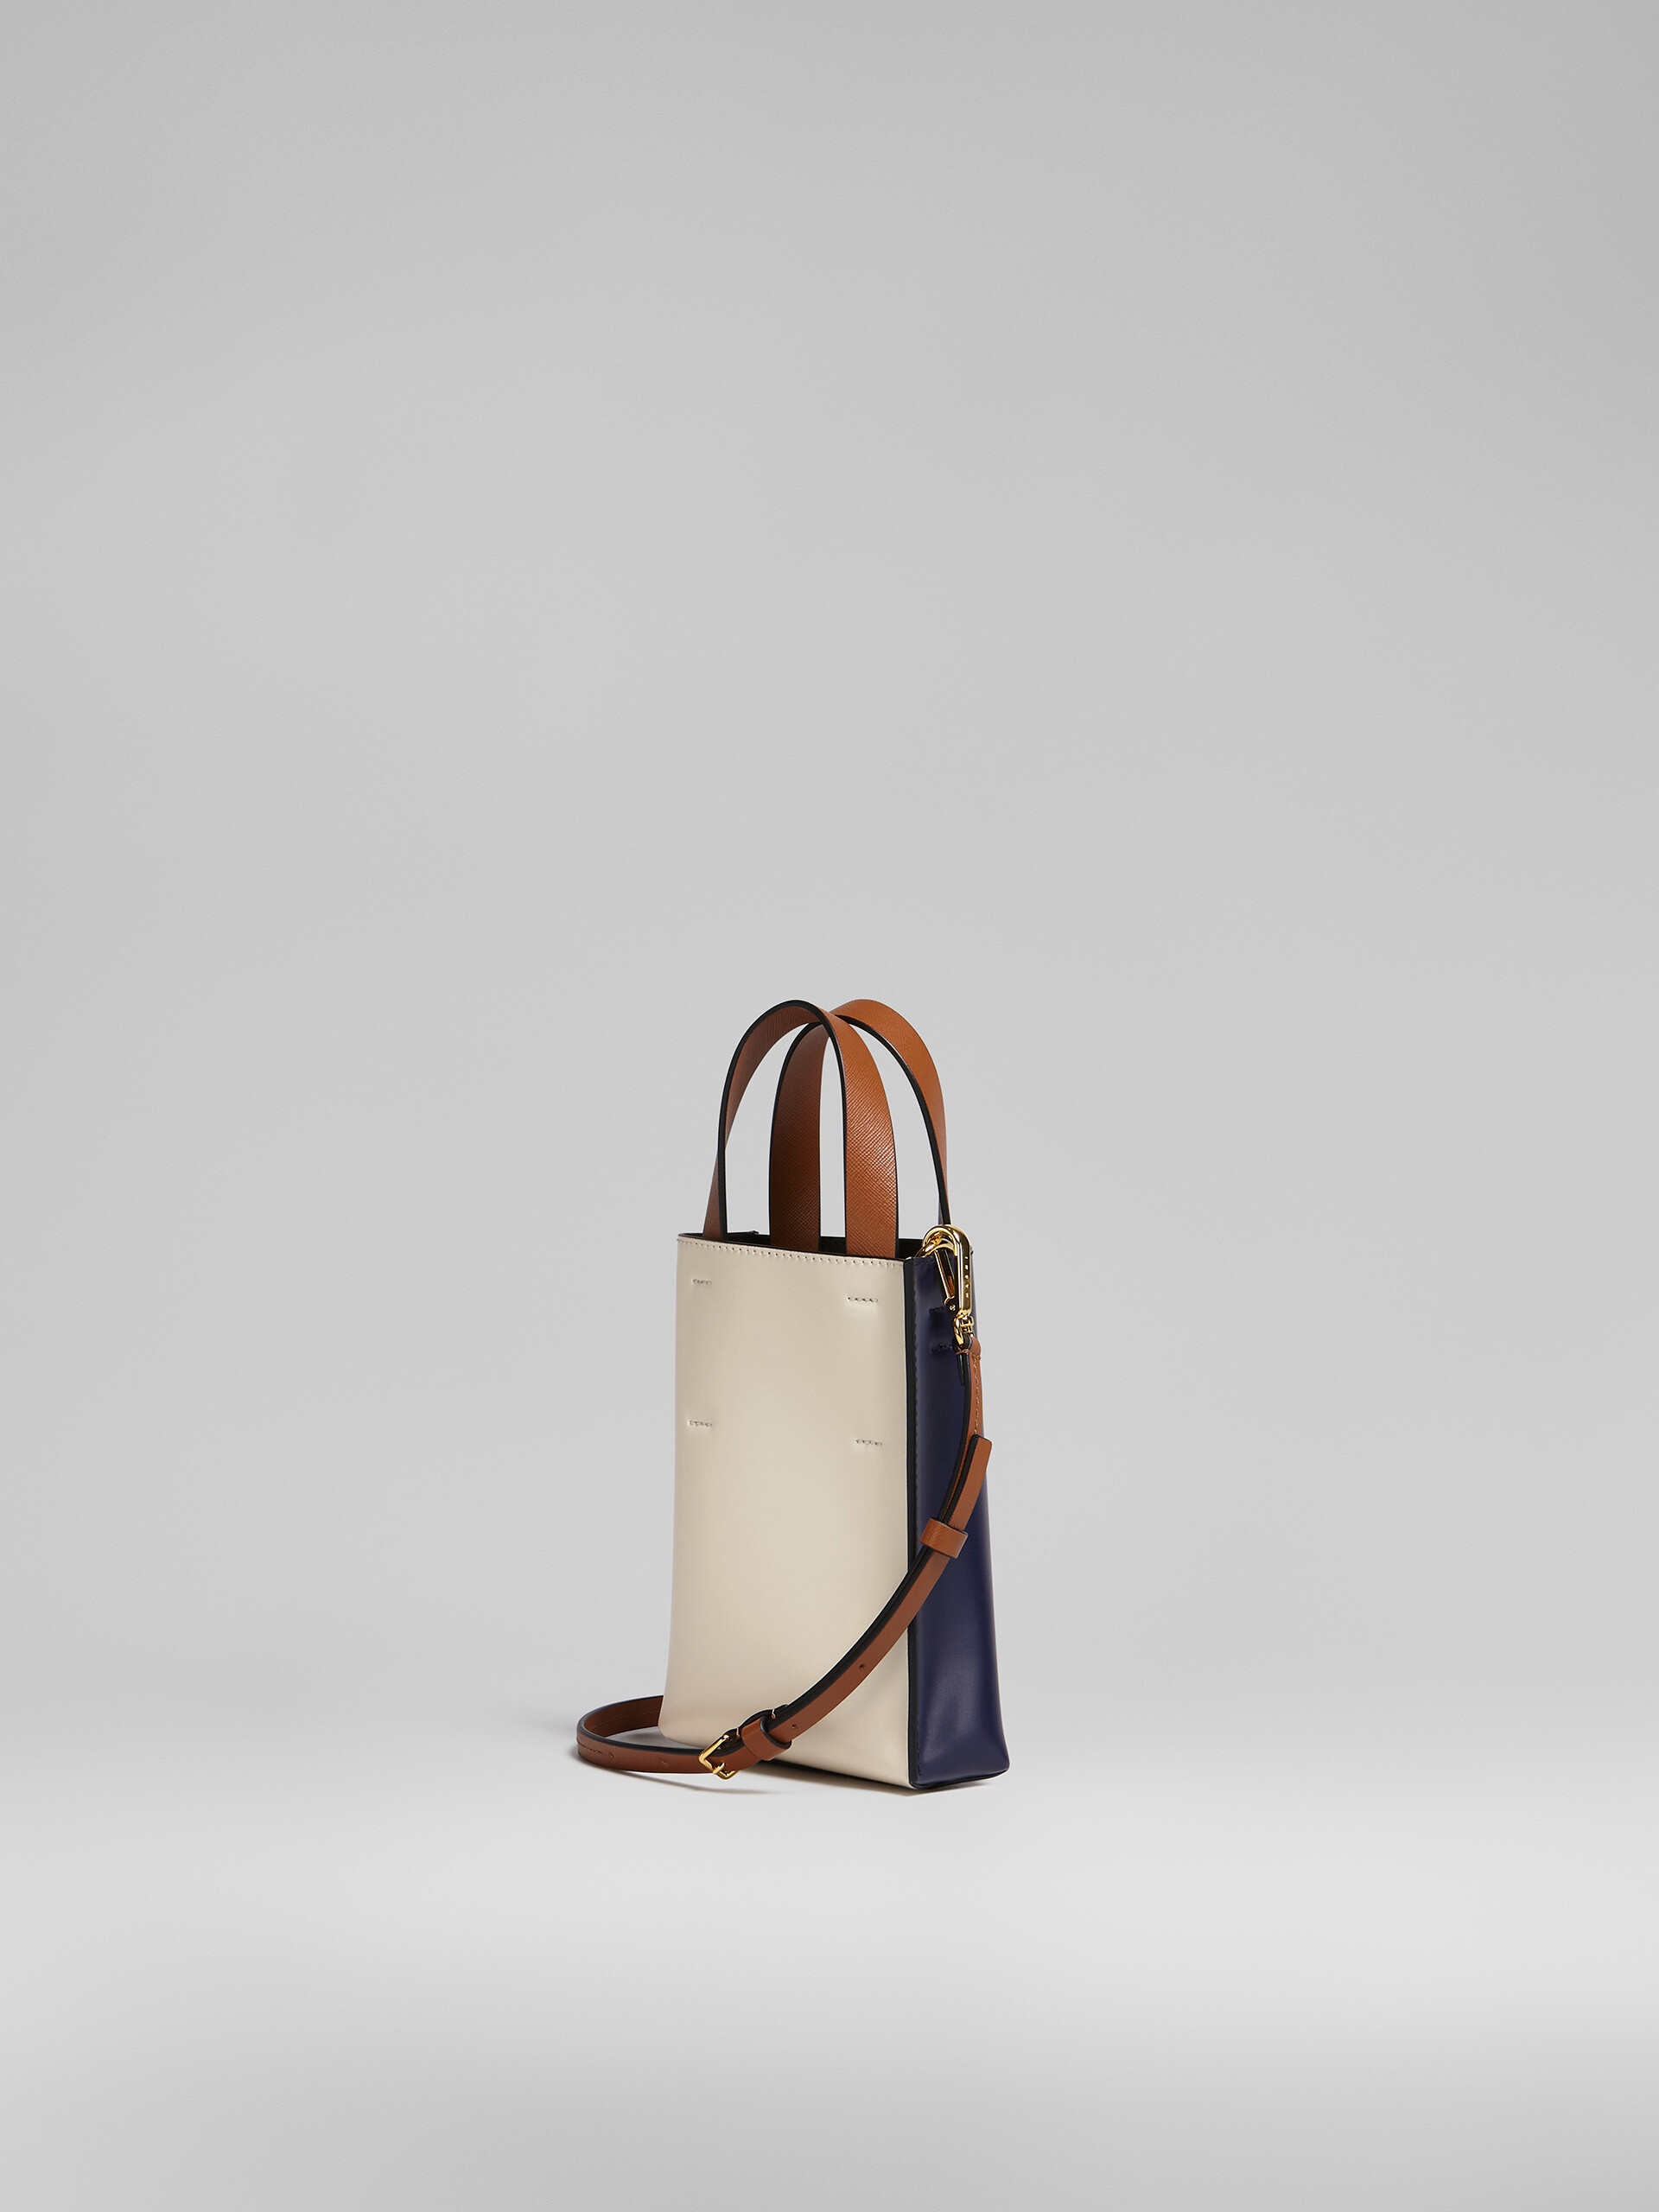 MUSEO nano bag in blue and white leather